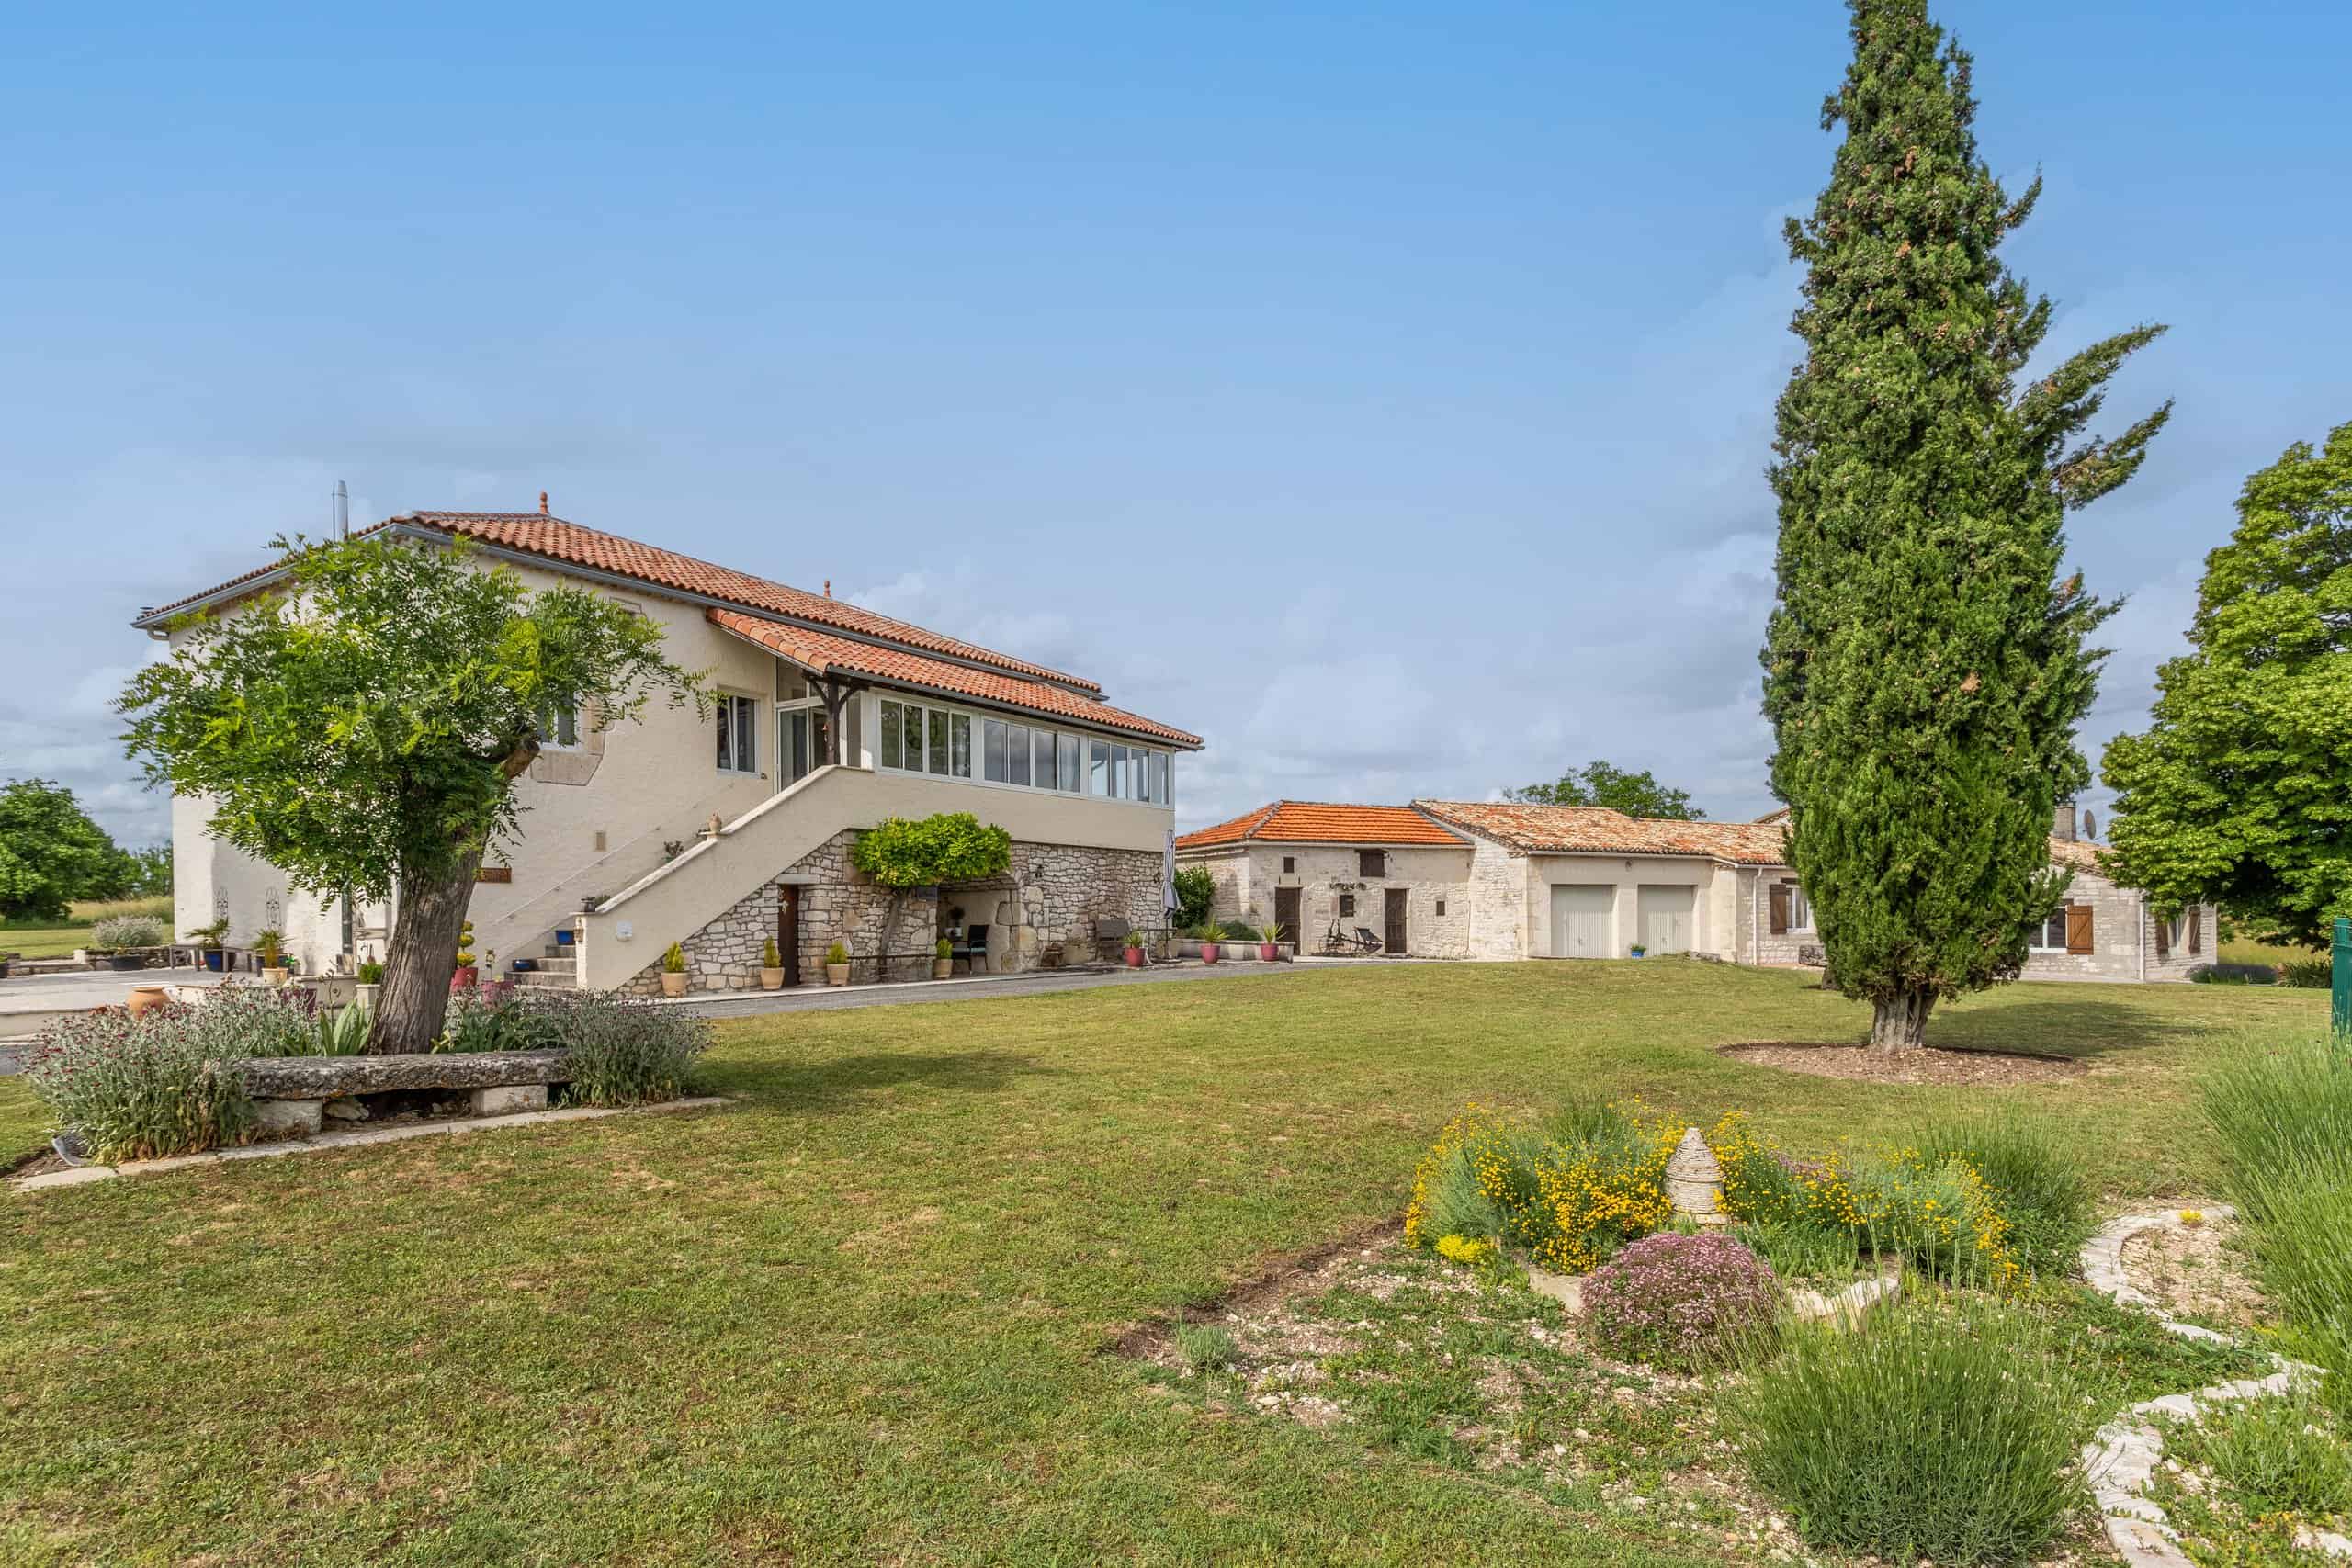 Country property with 3 houses | Wheeler Property Southwest France